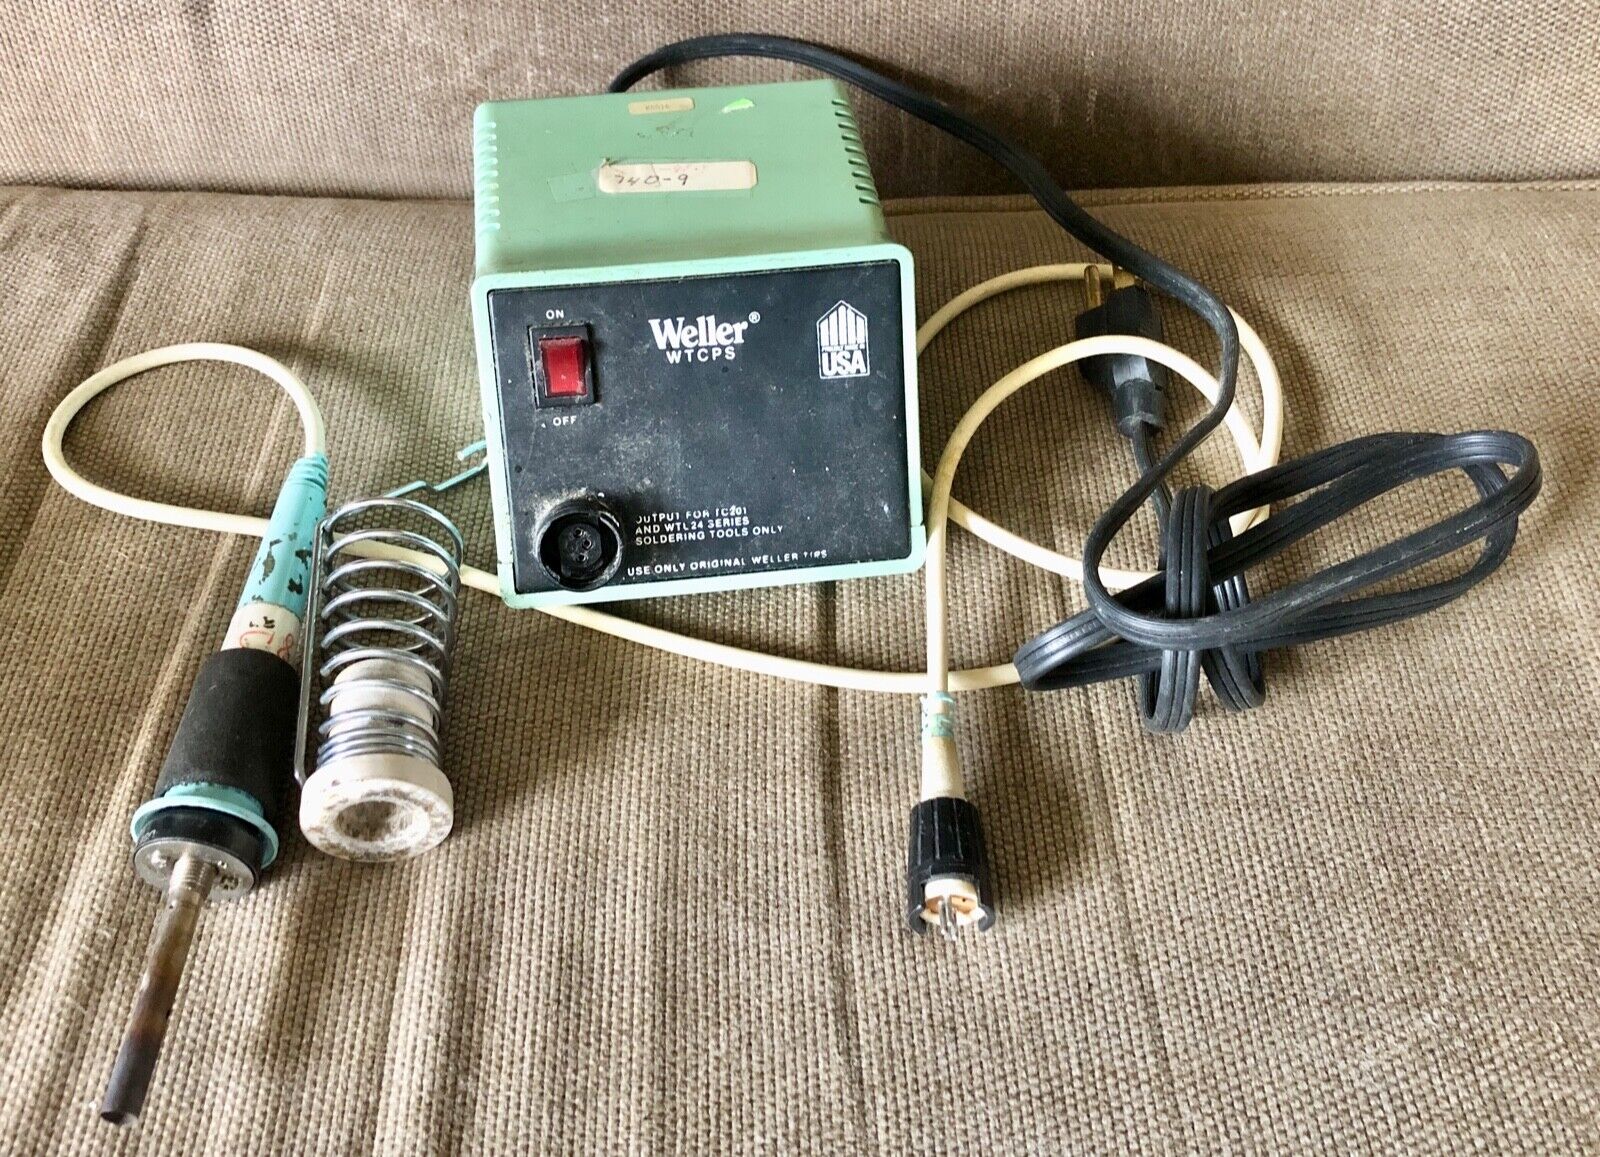 Weller WTCPS Soldering Station PU120 and TC201 Iron - Needs Tip